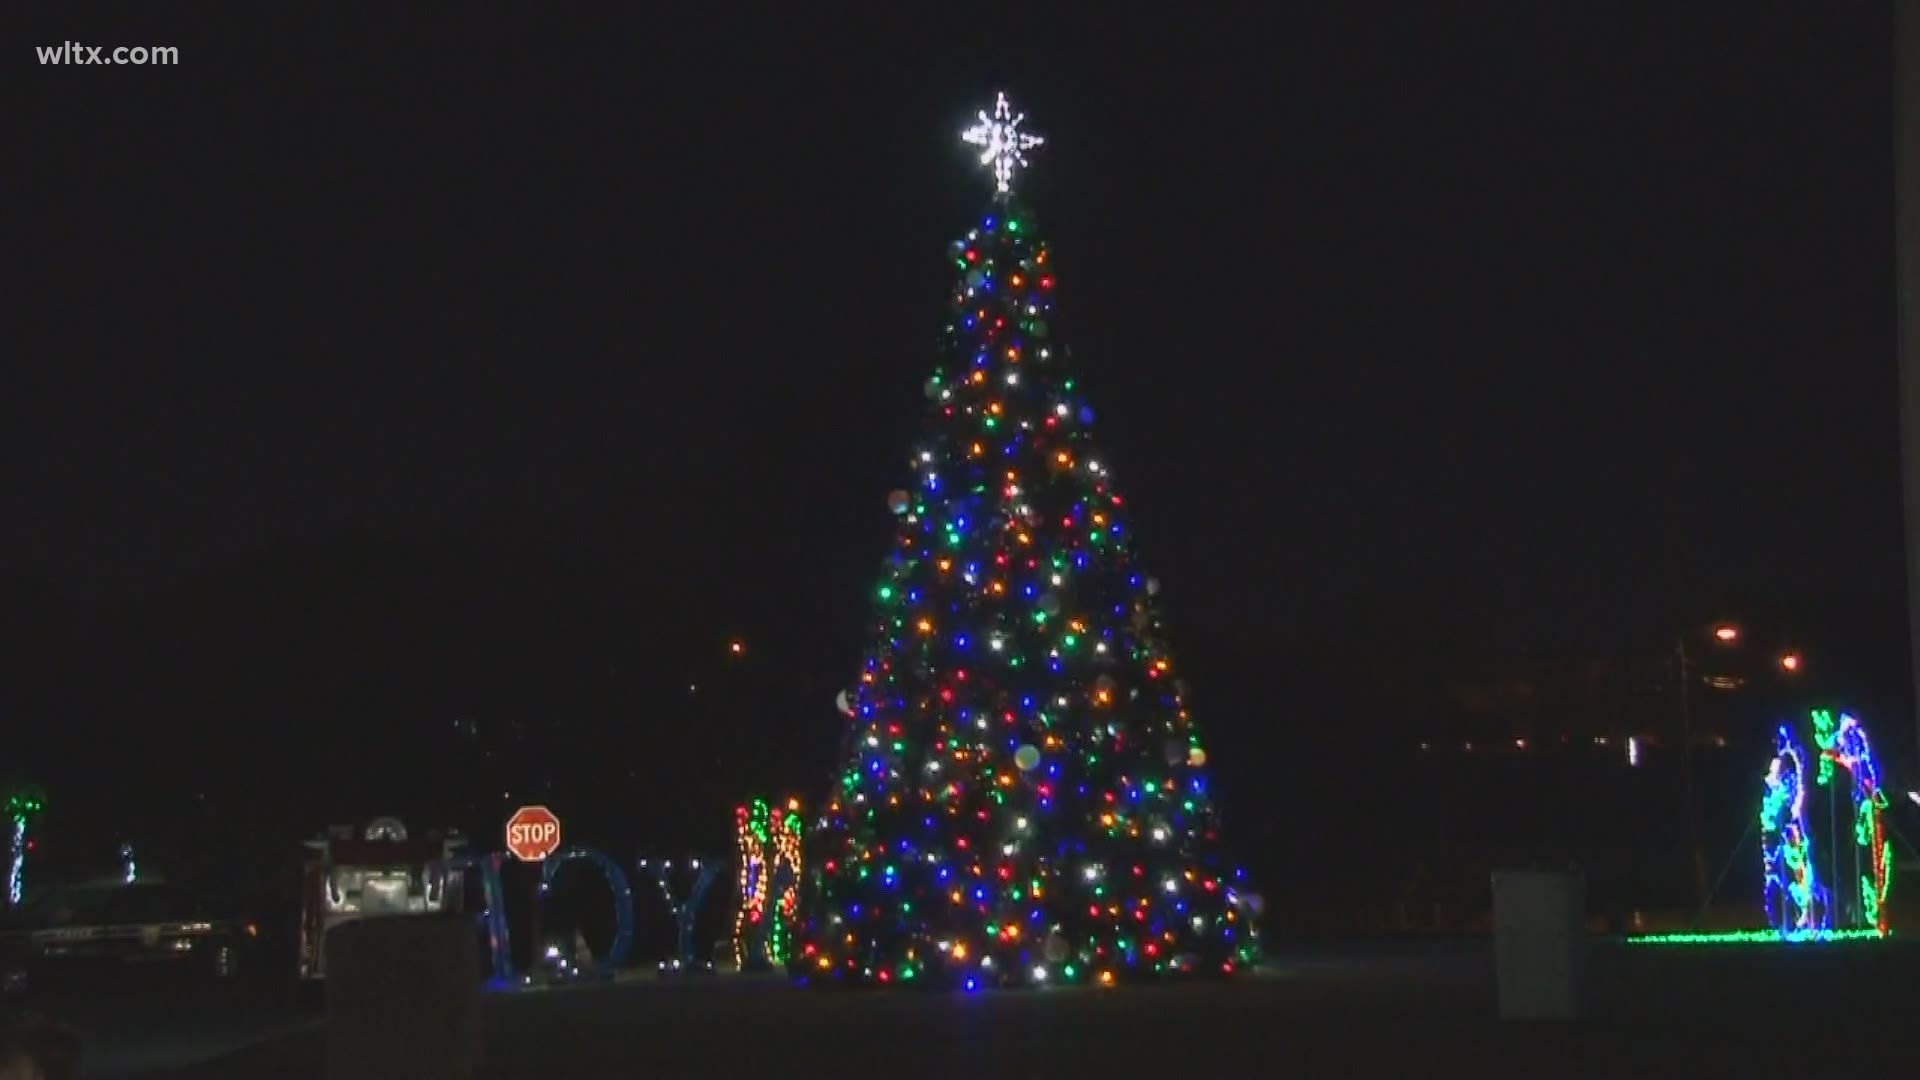 cayce west columbia lit christmas tree at night